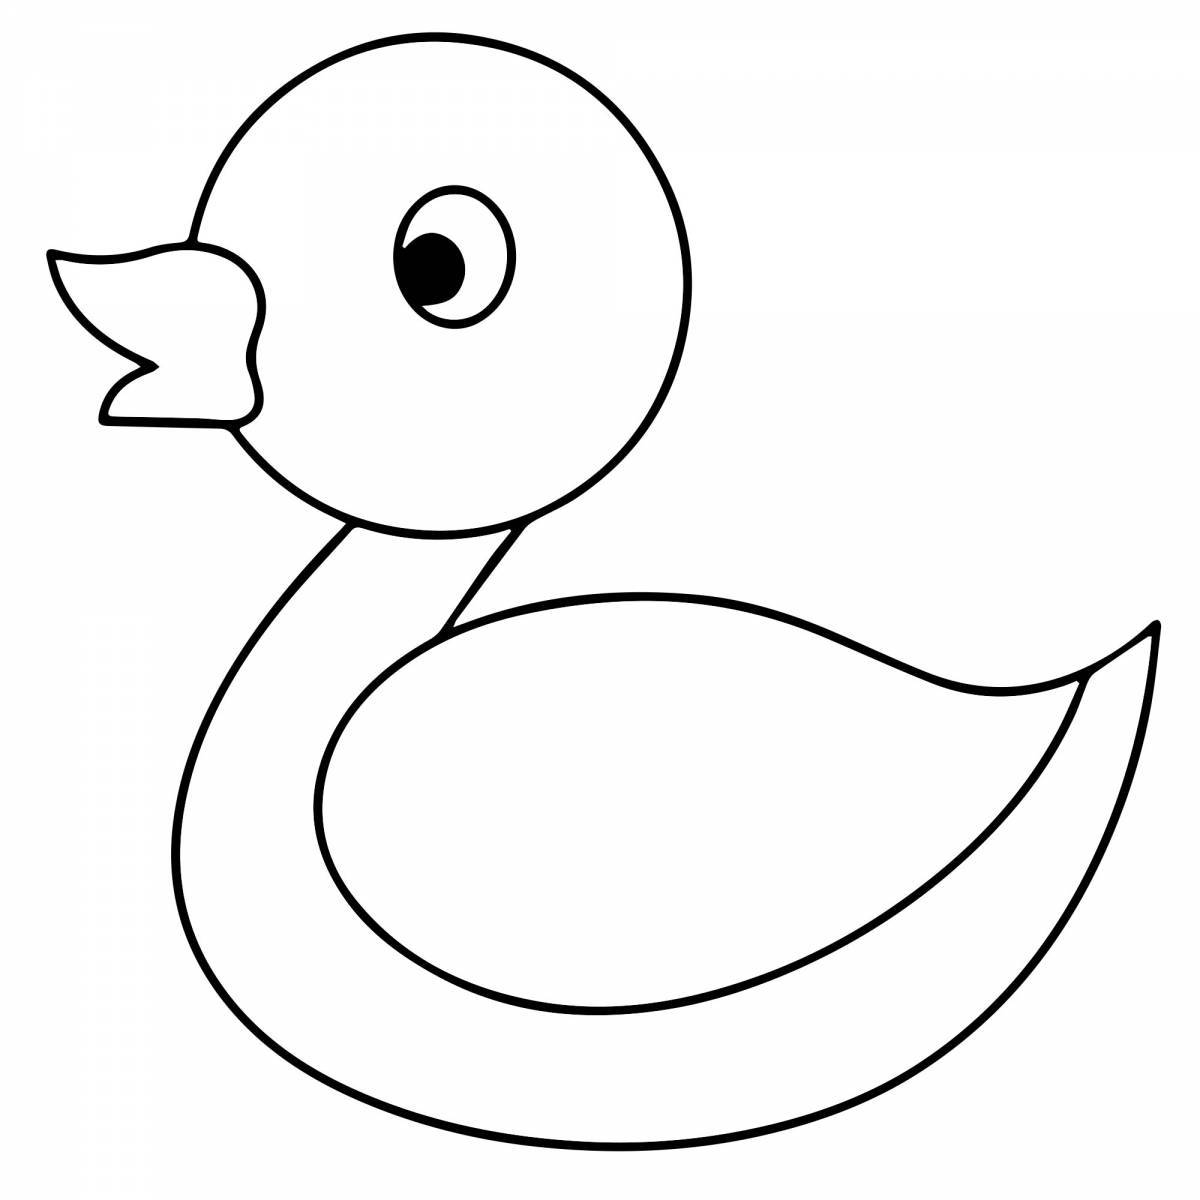 Adorable duck coloring page for kids